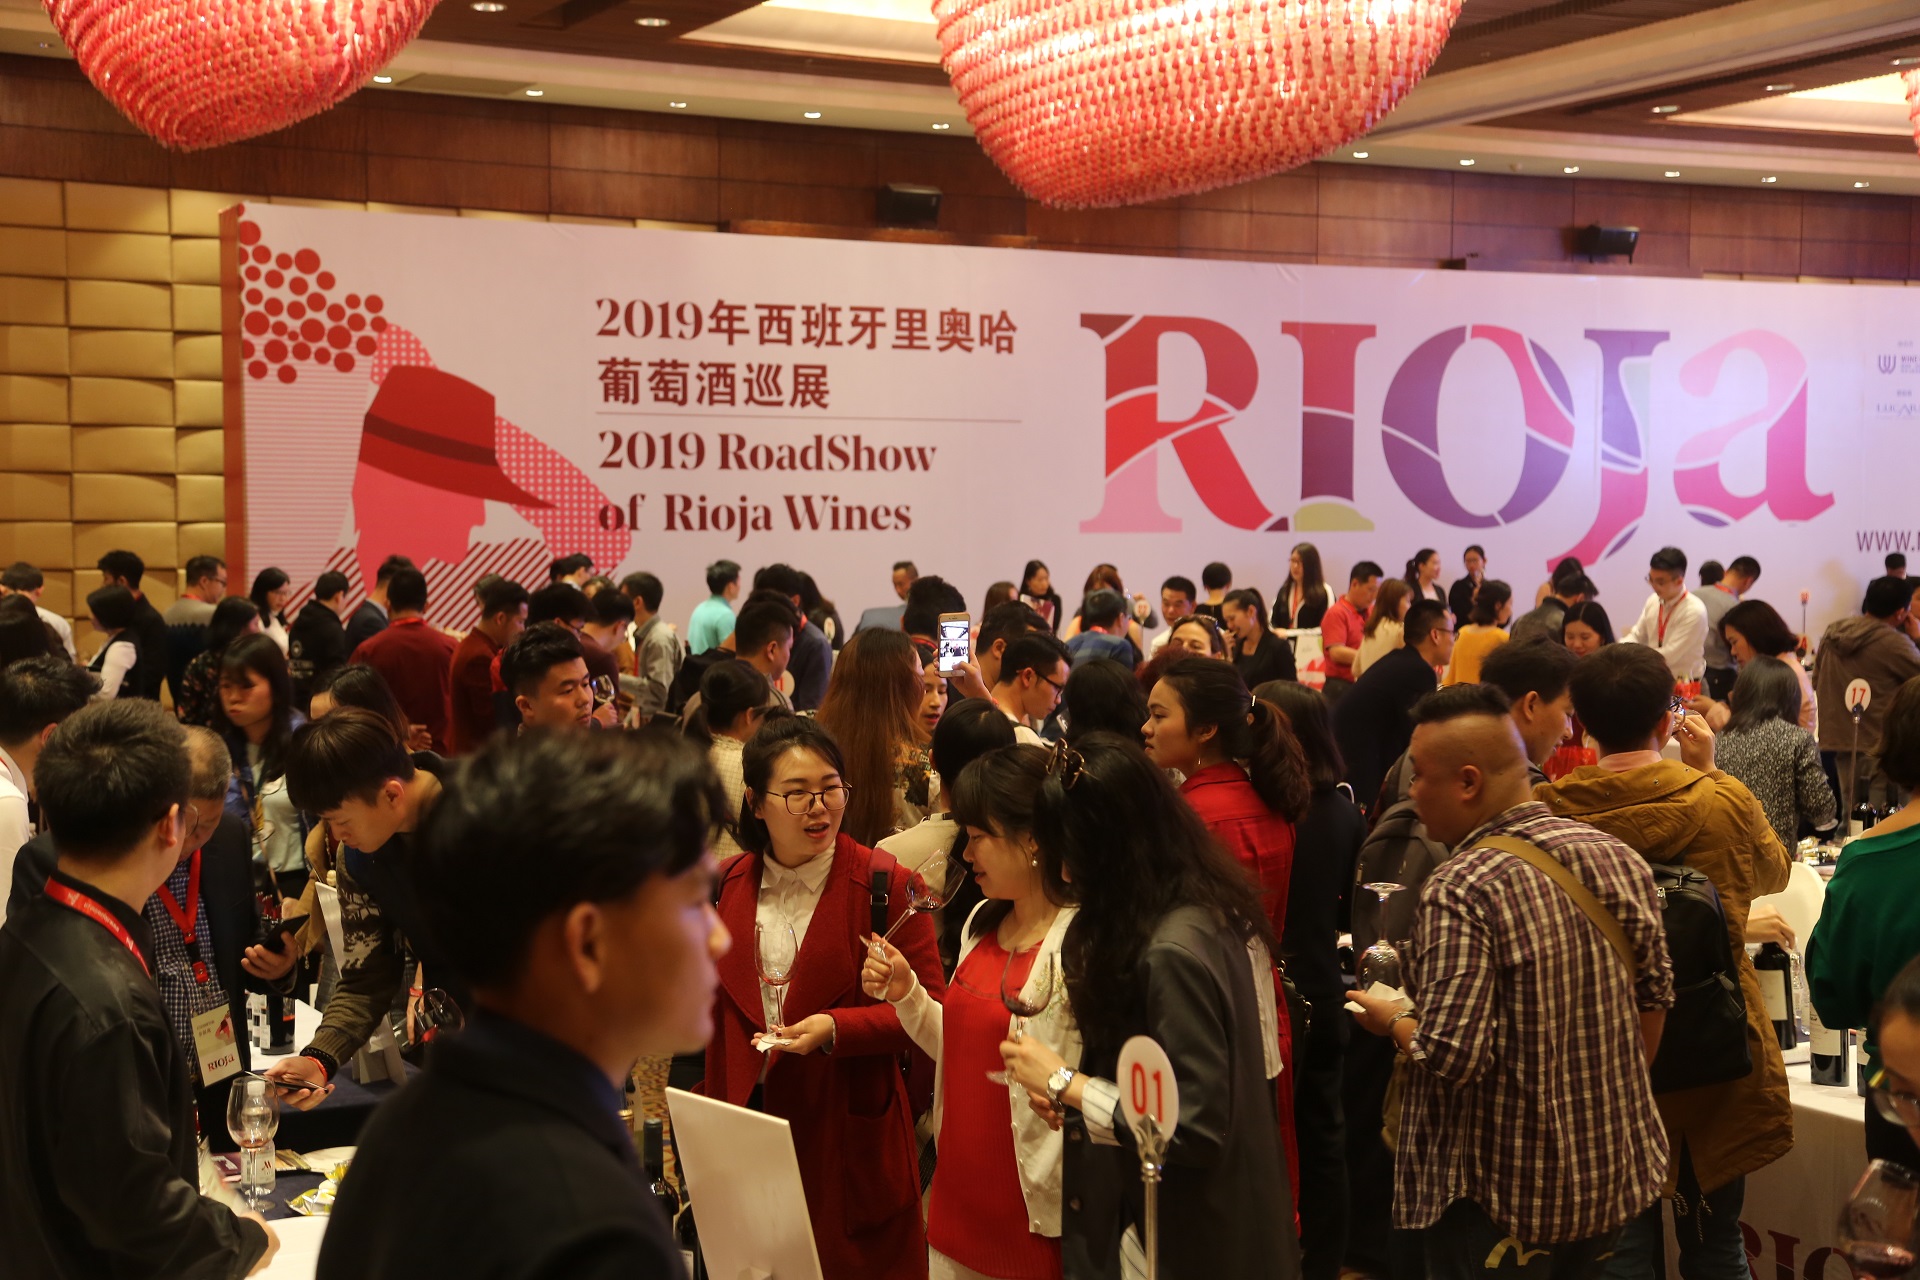 Growing interest in Rioja in China’s interior